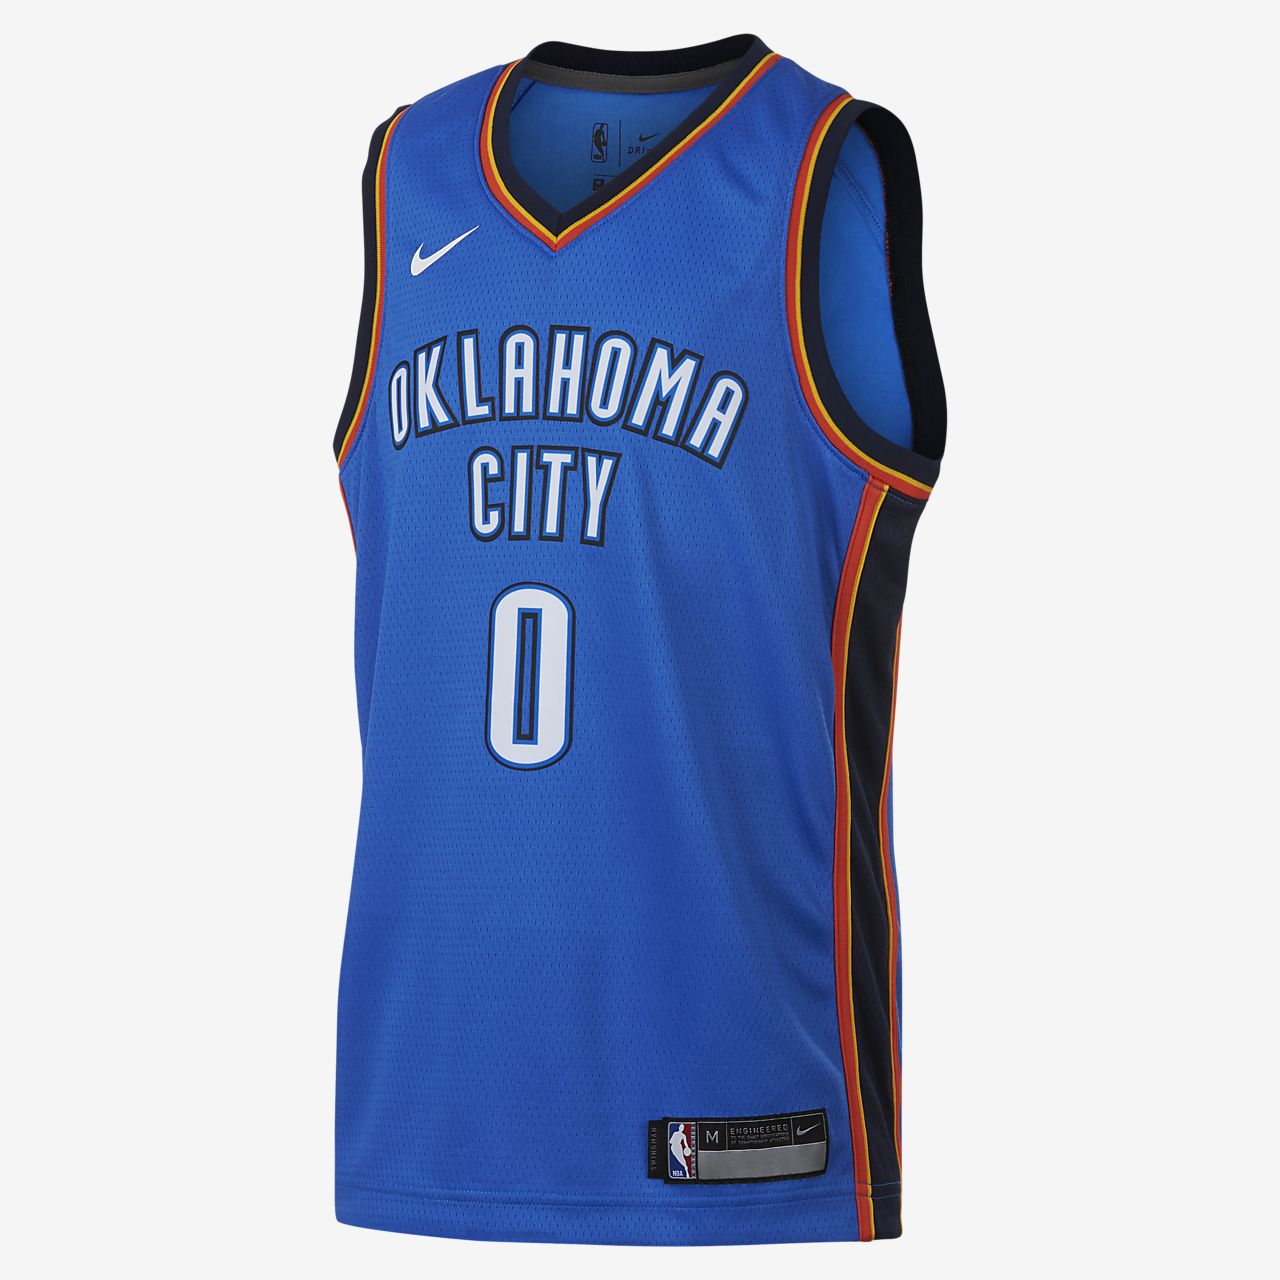 westbrook jersey for sale